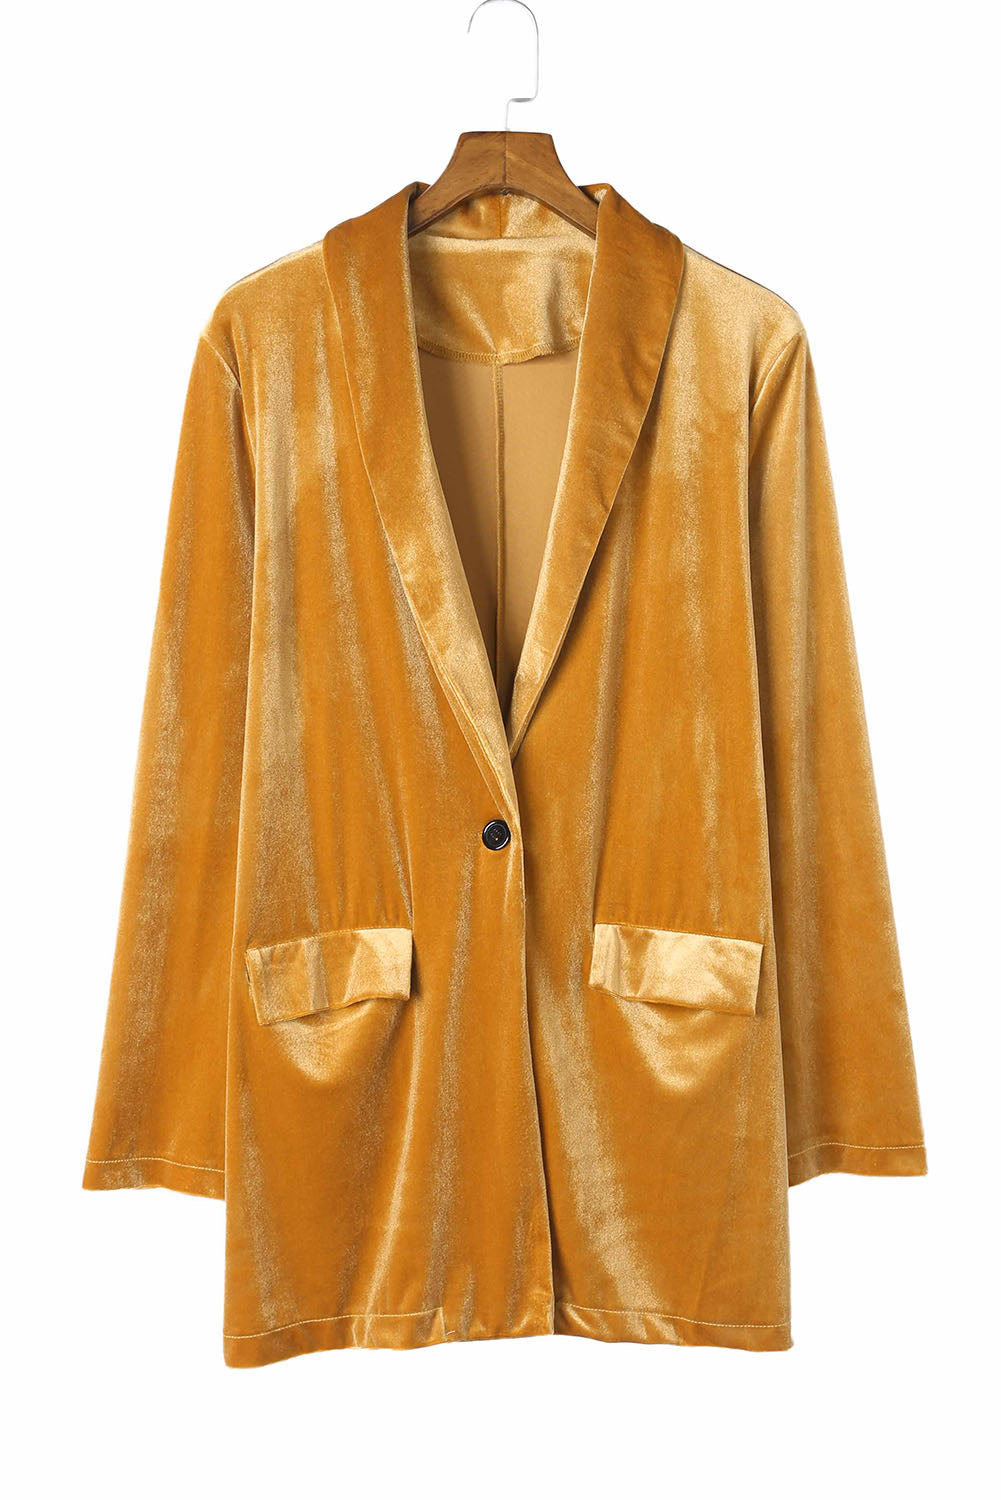 LC852449-7-S, LC852449-7-M, LC852449-7-L, LC852449-7-XL, Yellow Women Velvet Blazer Jacket Relaxed fit Casual Outerwear